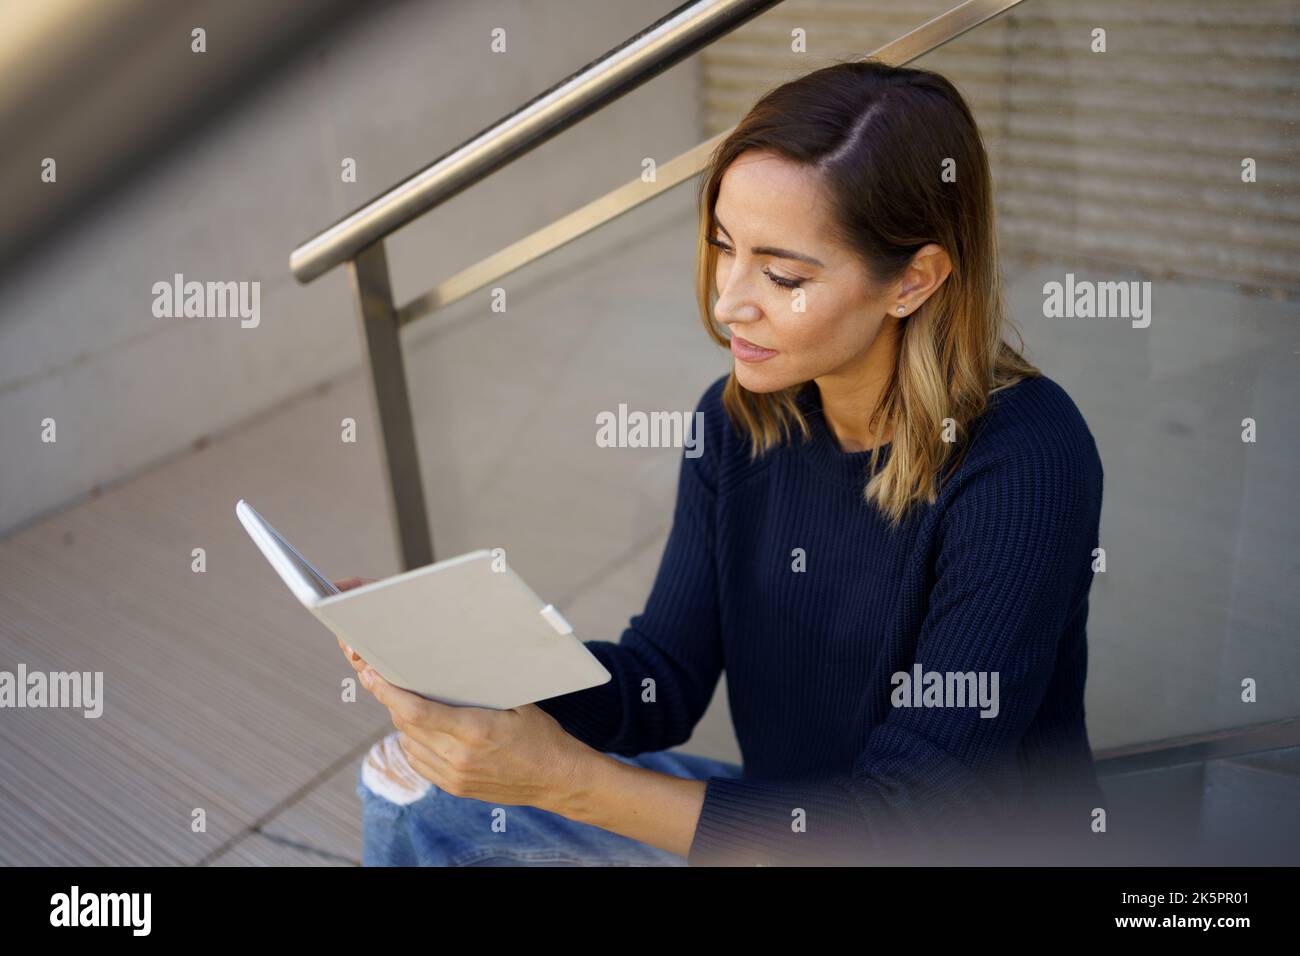 Middle-aged woman reading with her e-book on a coffee break near her office. Stock Photo